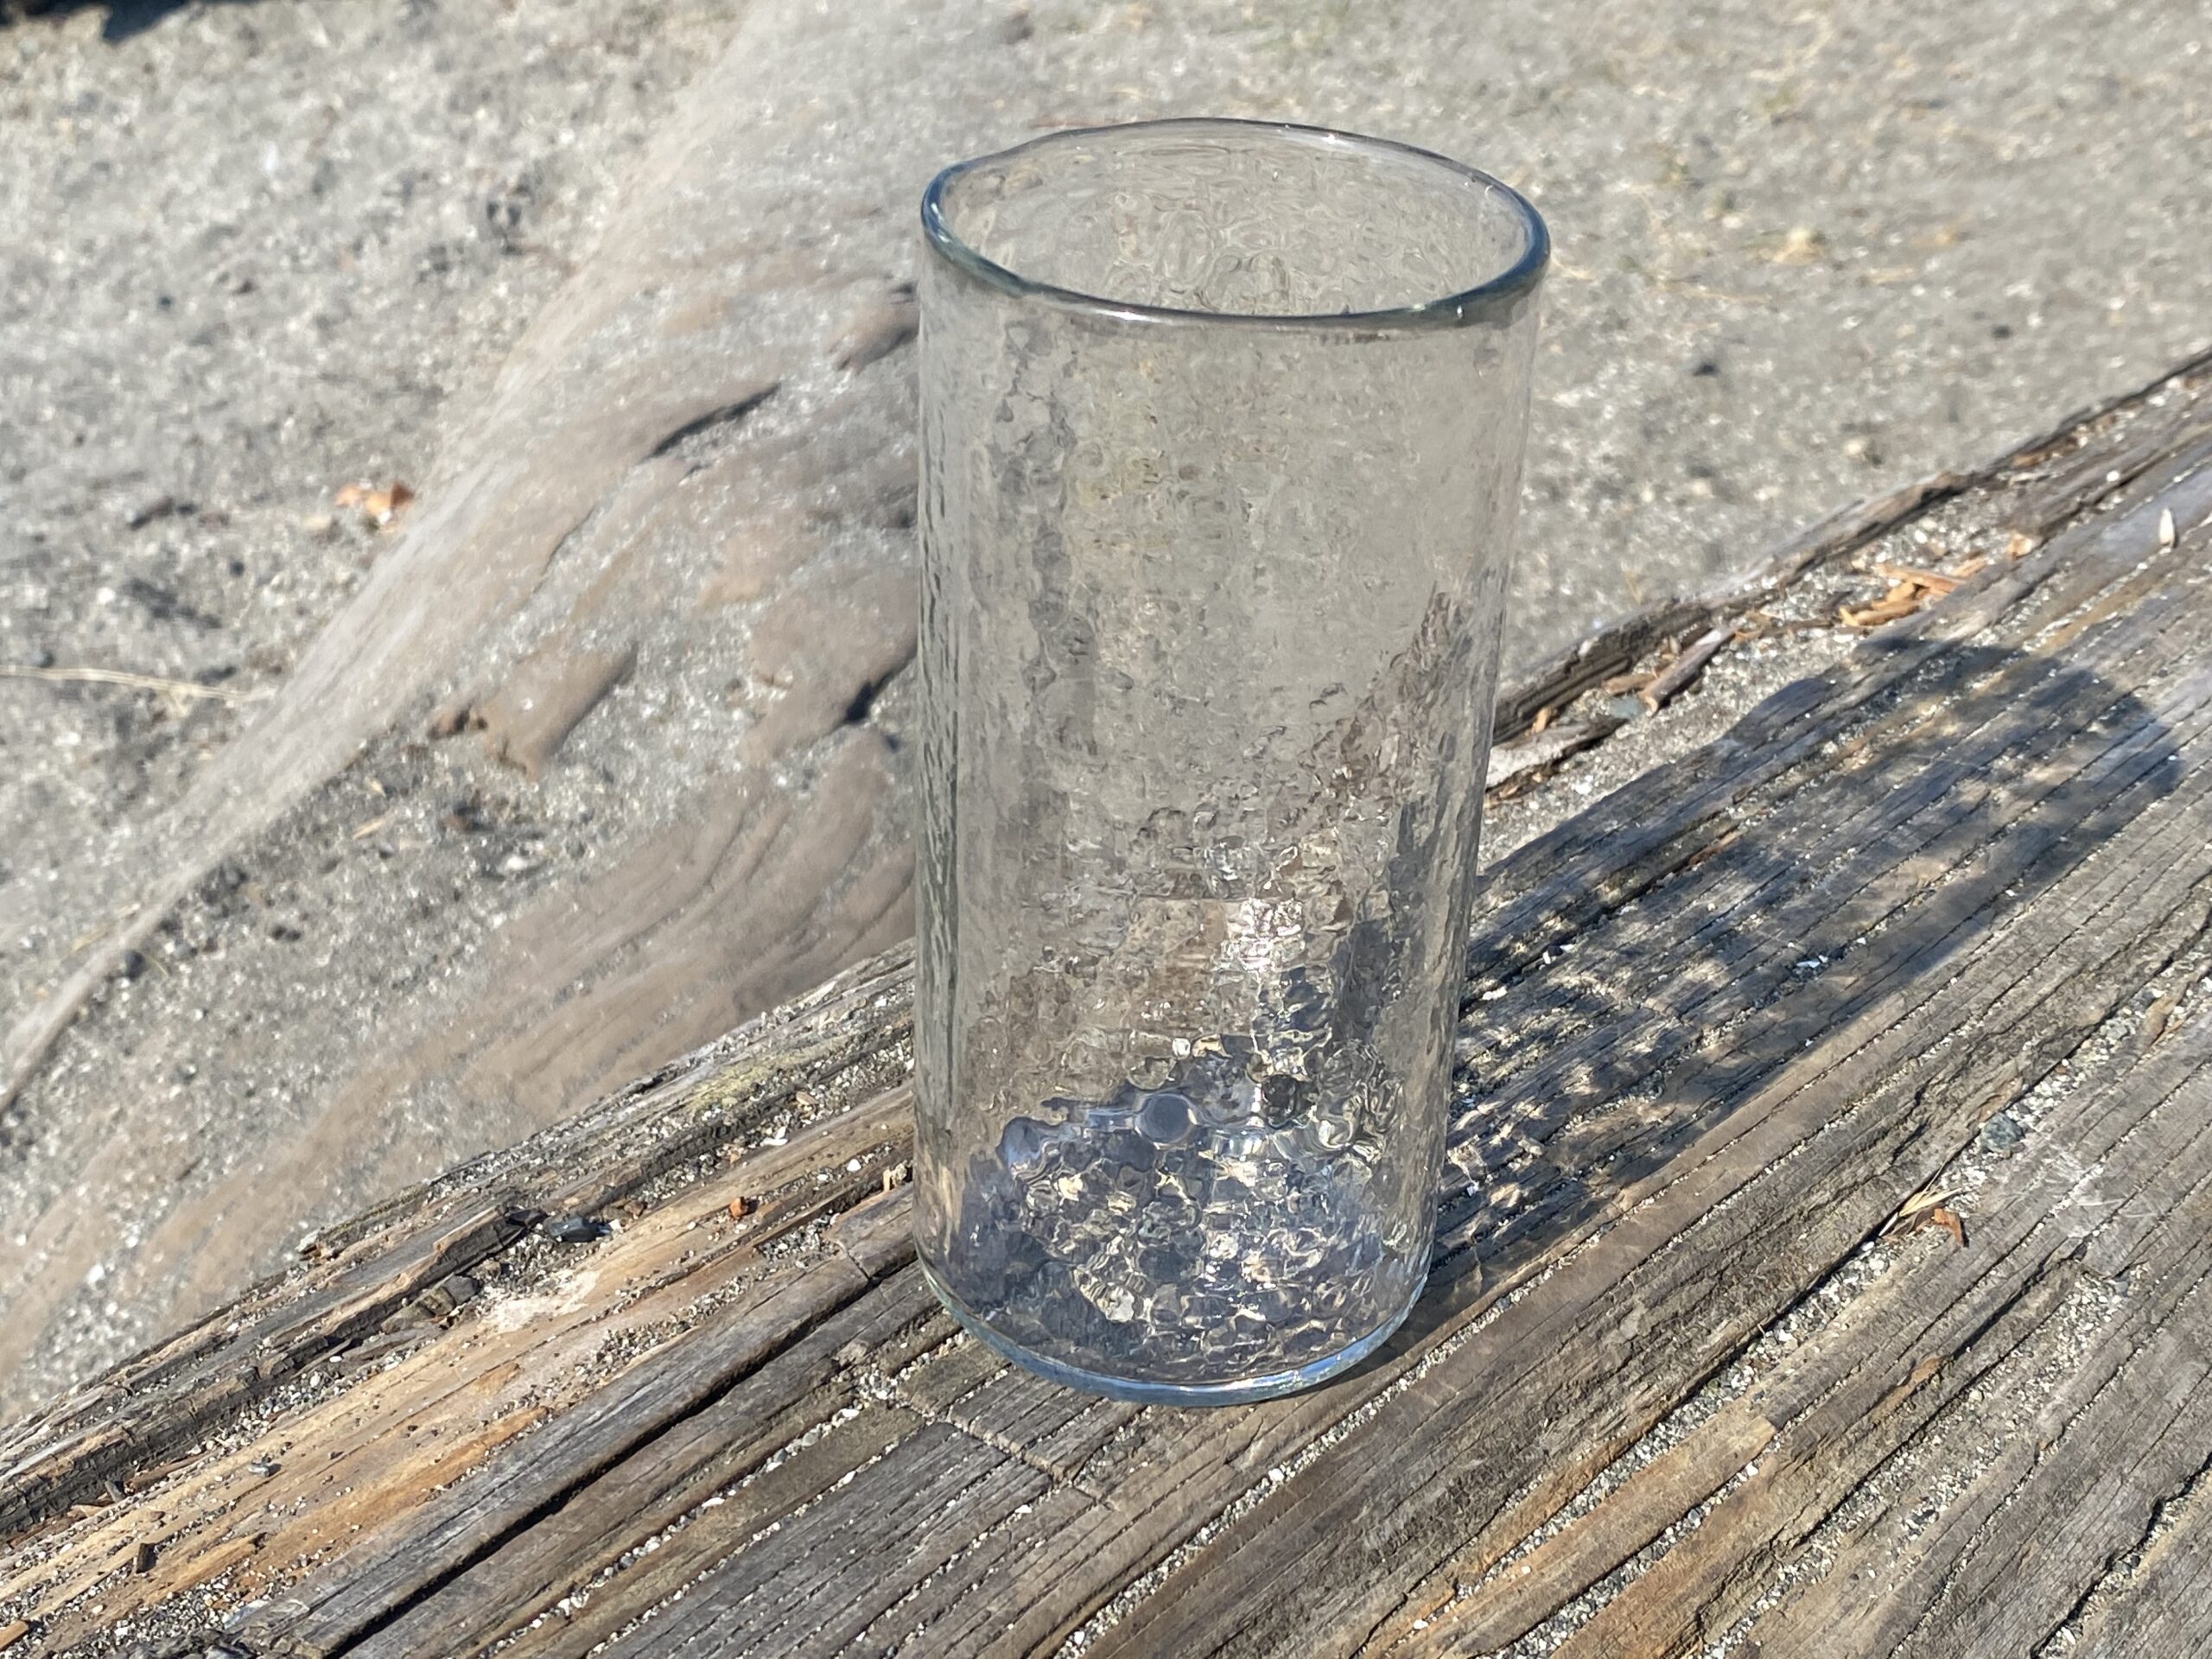 Hammered Handcrafted Drinking Glasses  Drinking glasses, Glassware  collection, Pottery barn